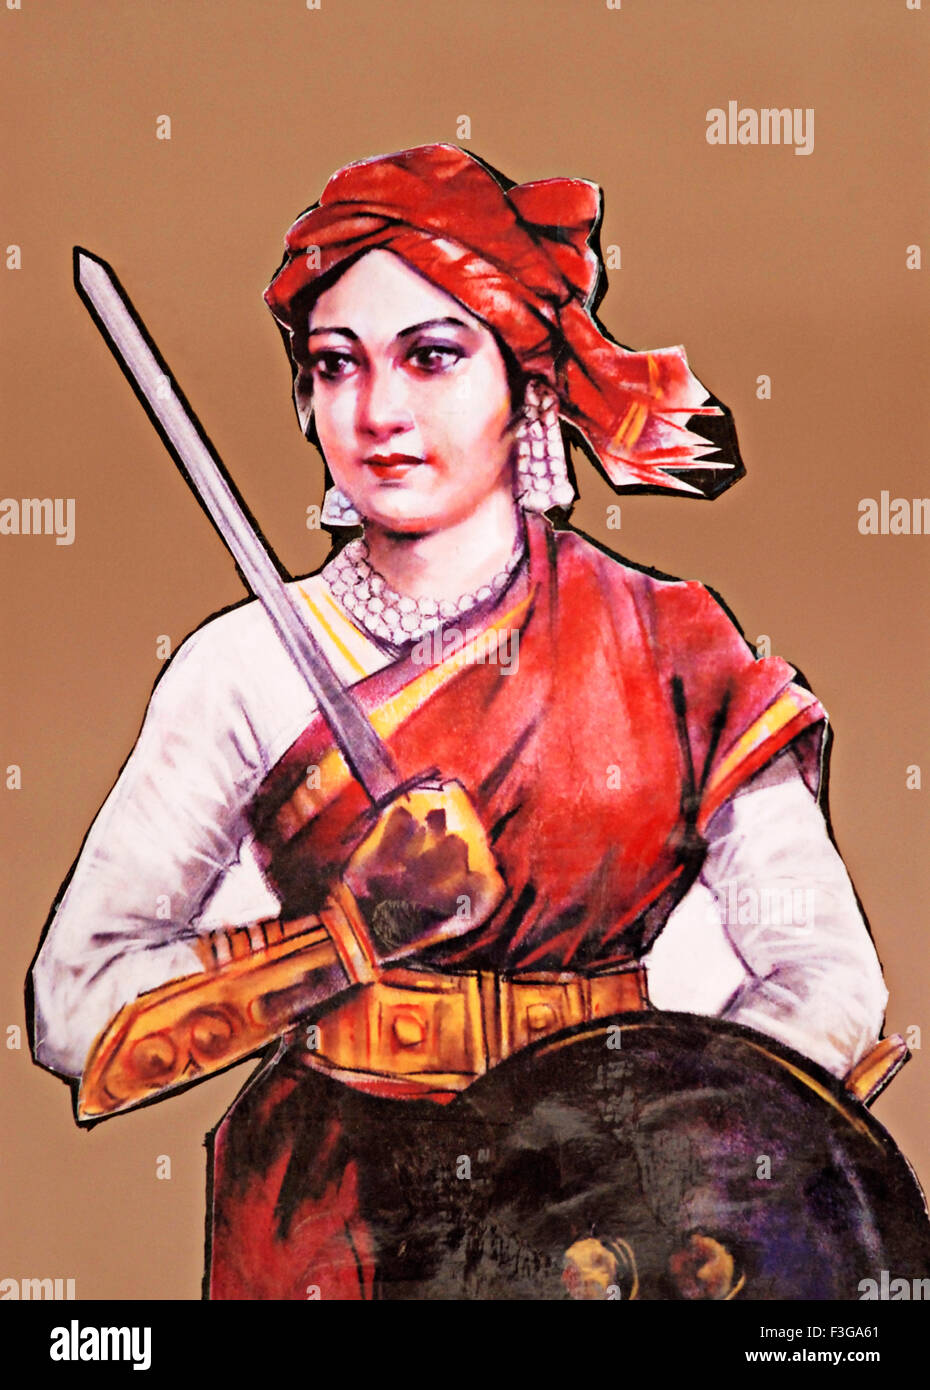 Lakshmibai , Rani of Jhansi , Rani Laxmibai , Queen of Jhansi , Indian Queen , great freedom fighter of India's first war of Independence Mutiny Thane India Asia Stock Photo